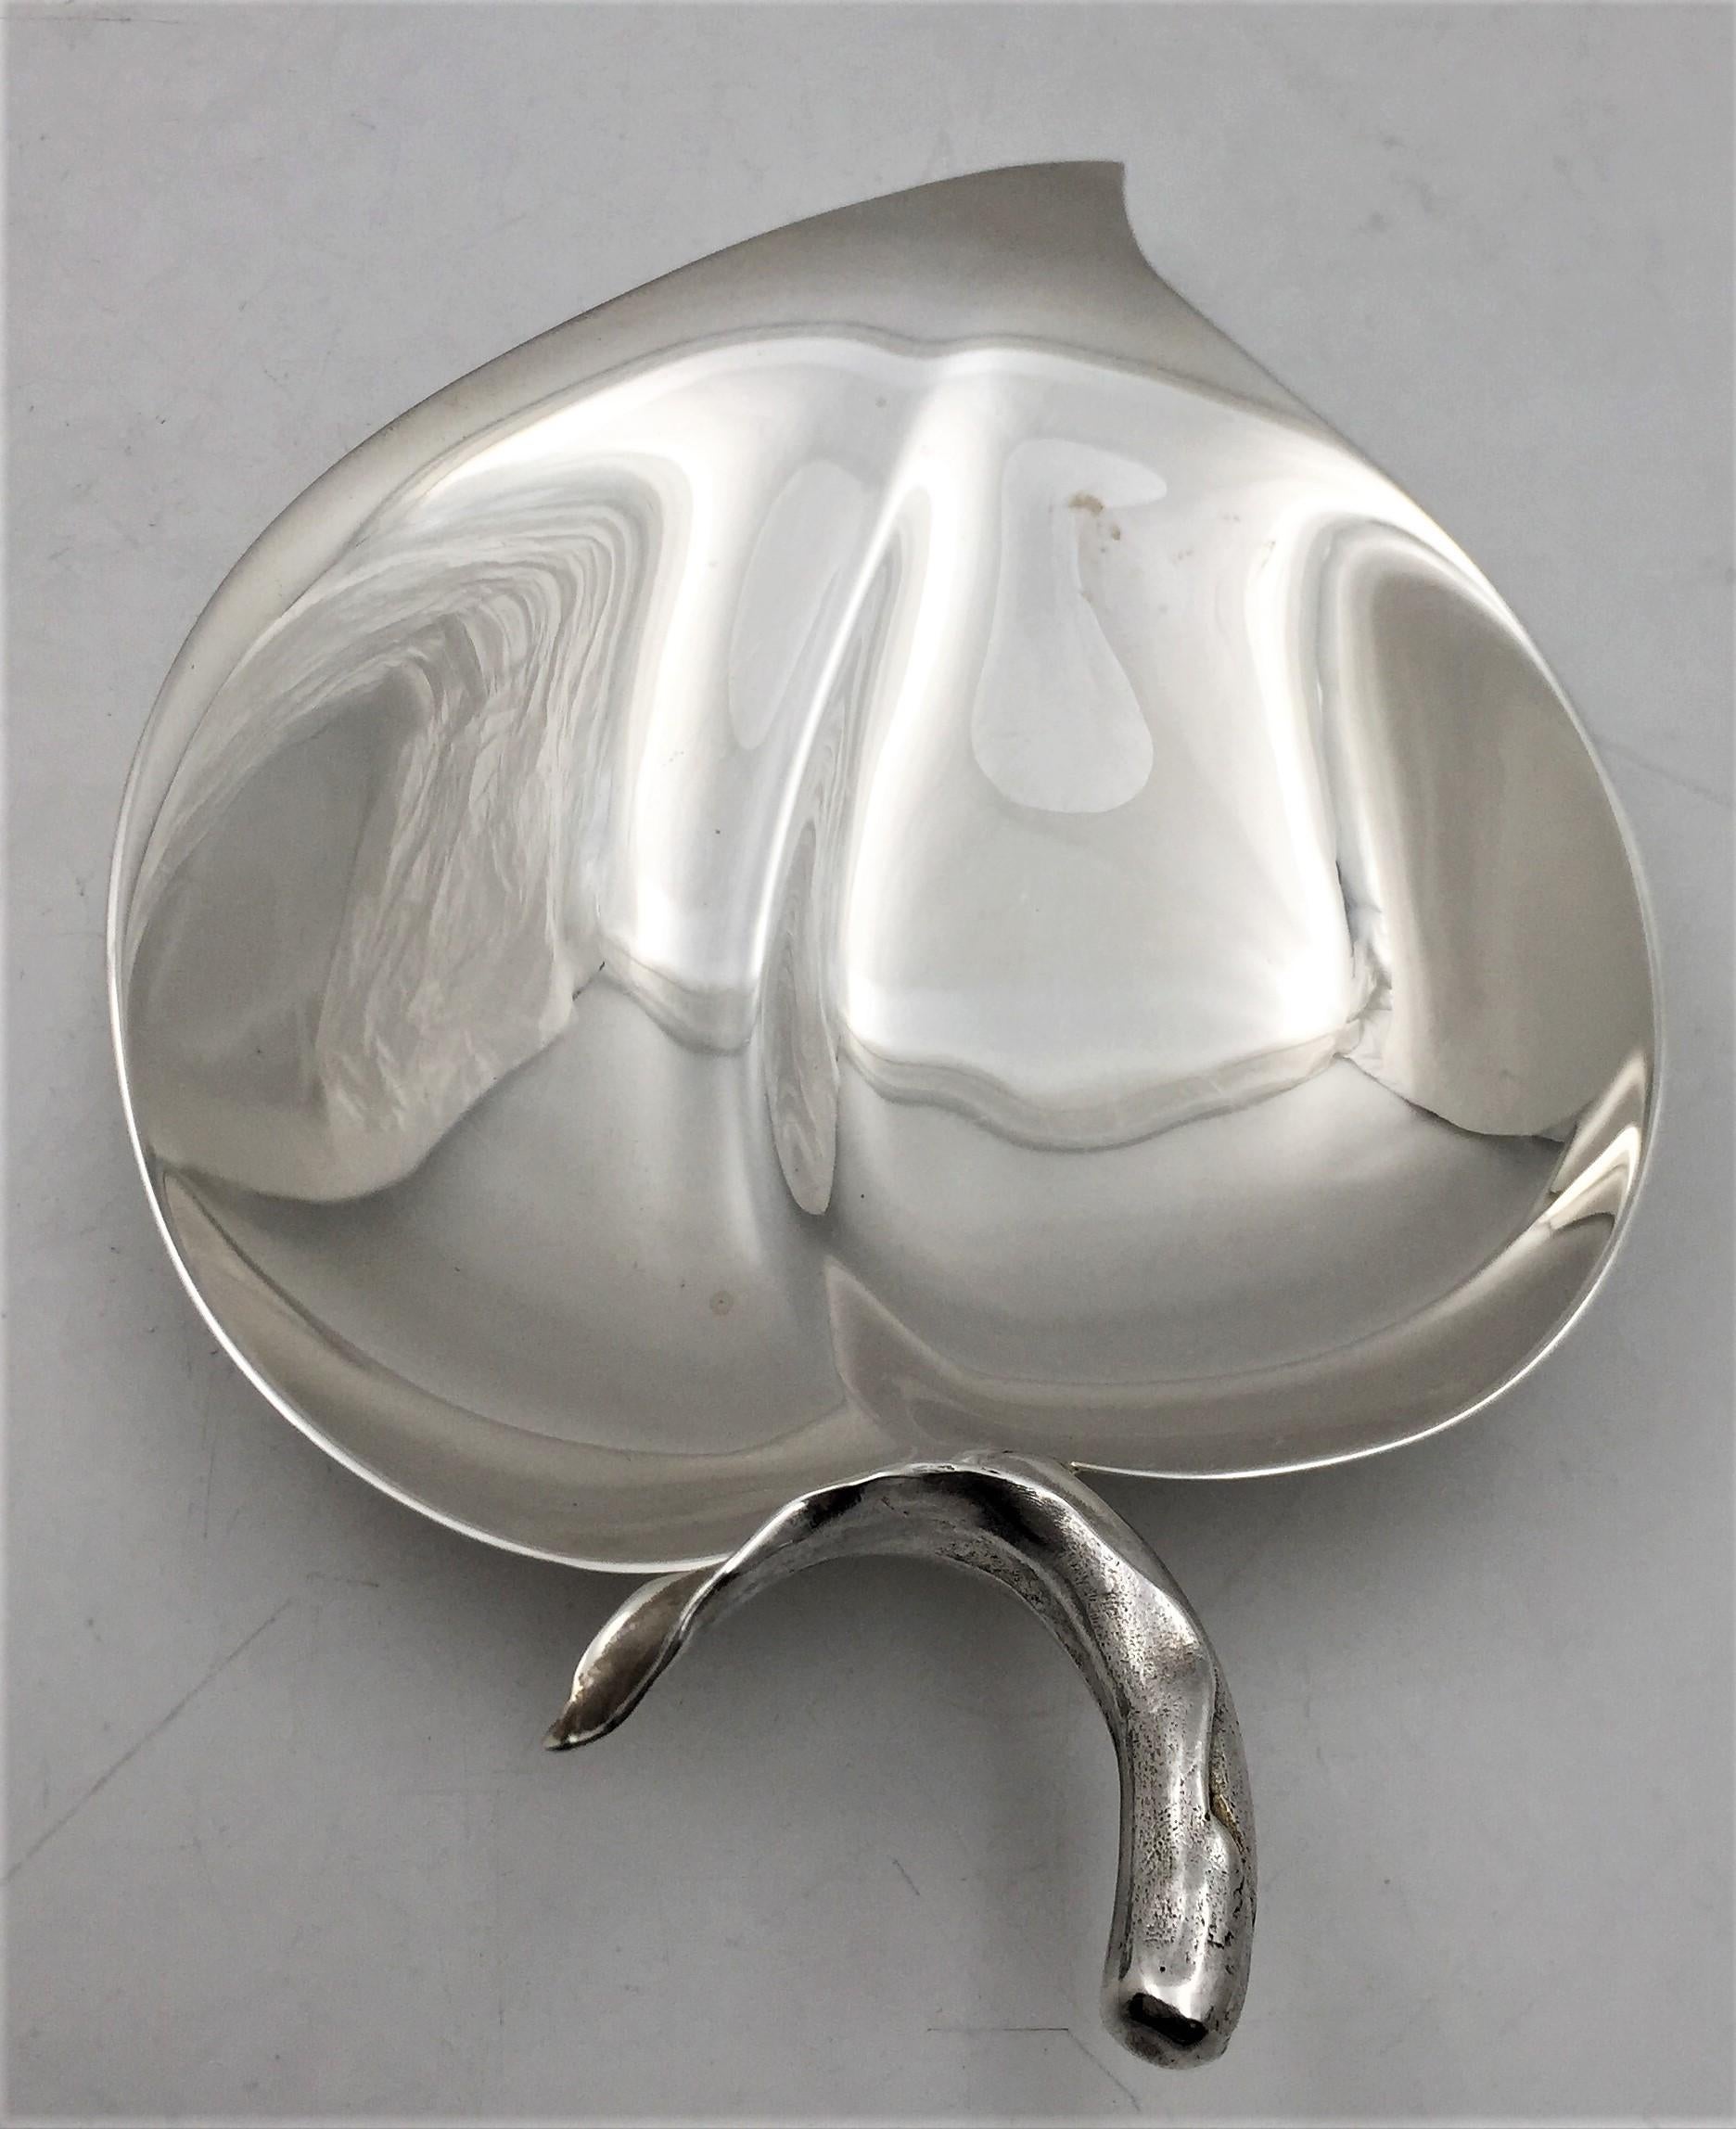 Tiffany & Co. sterling silver dish in pattern number 25053 from the 1950s and in Mid-Century Modern style with a beautiful geometric design. The dish stands on 2 balled feet and has a highly realistic handle. It measures 6 1/2'' in length by 4 1/4''